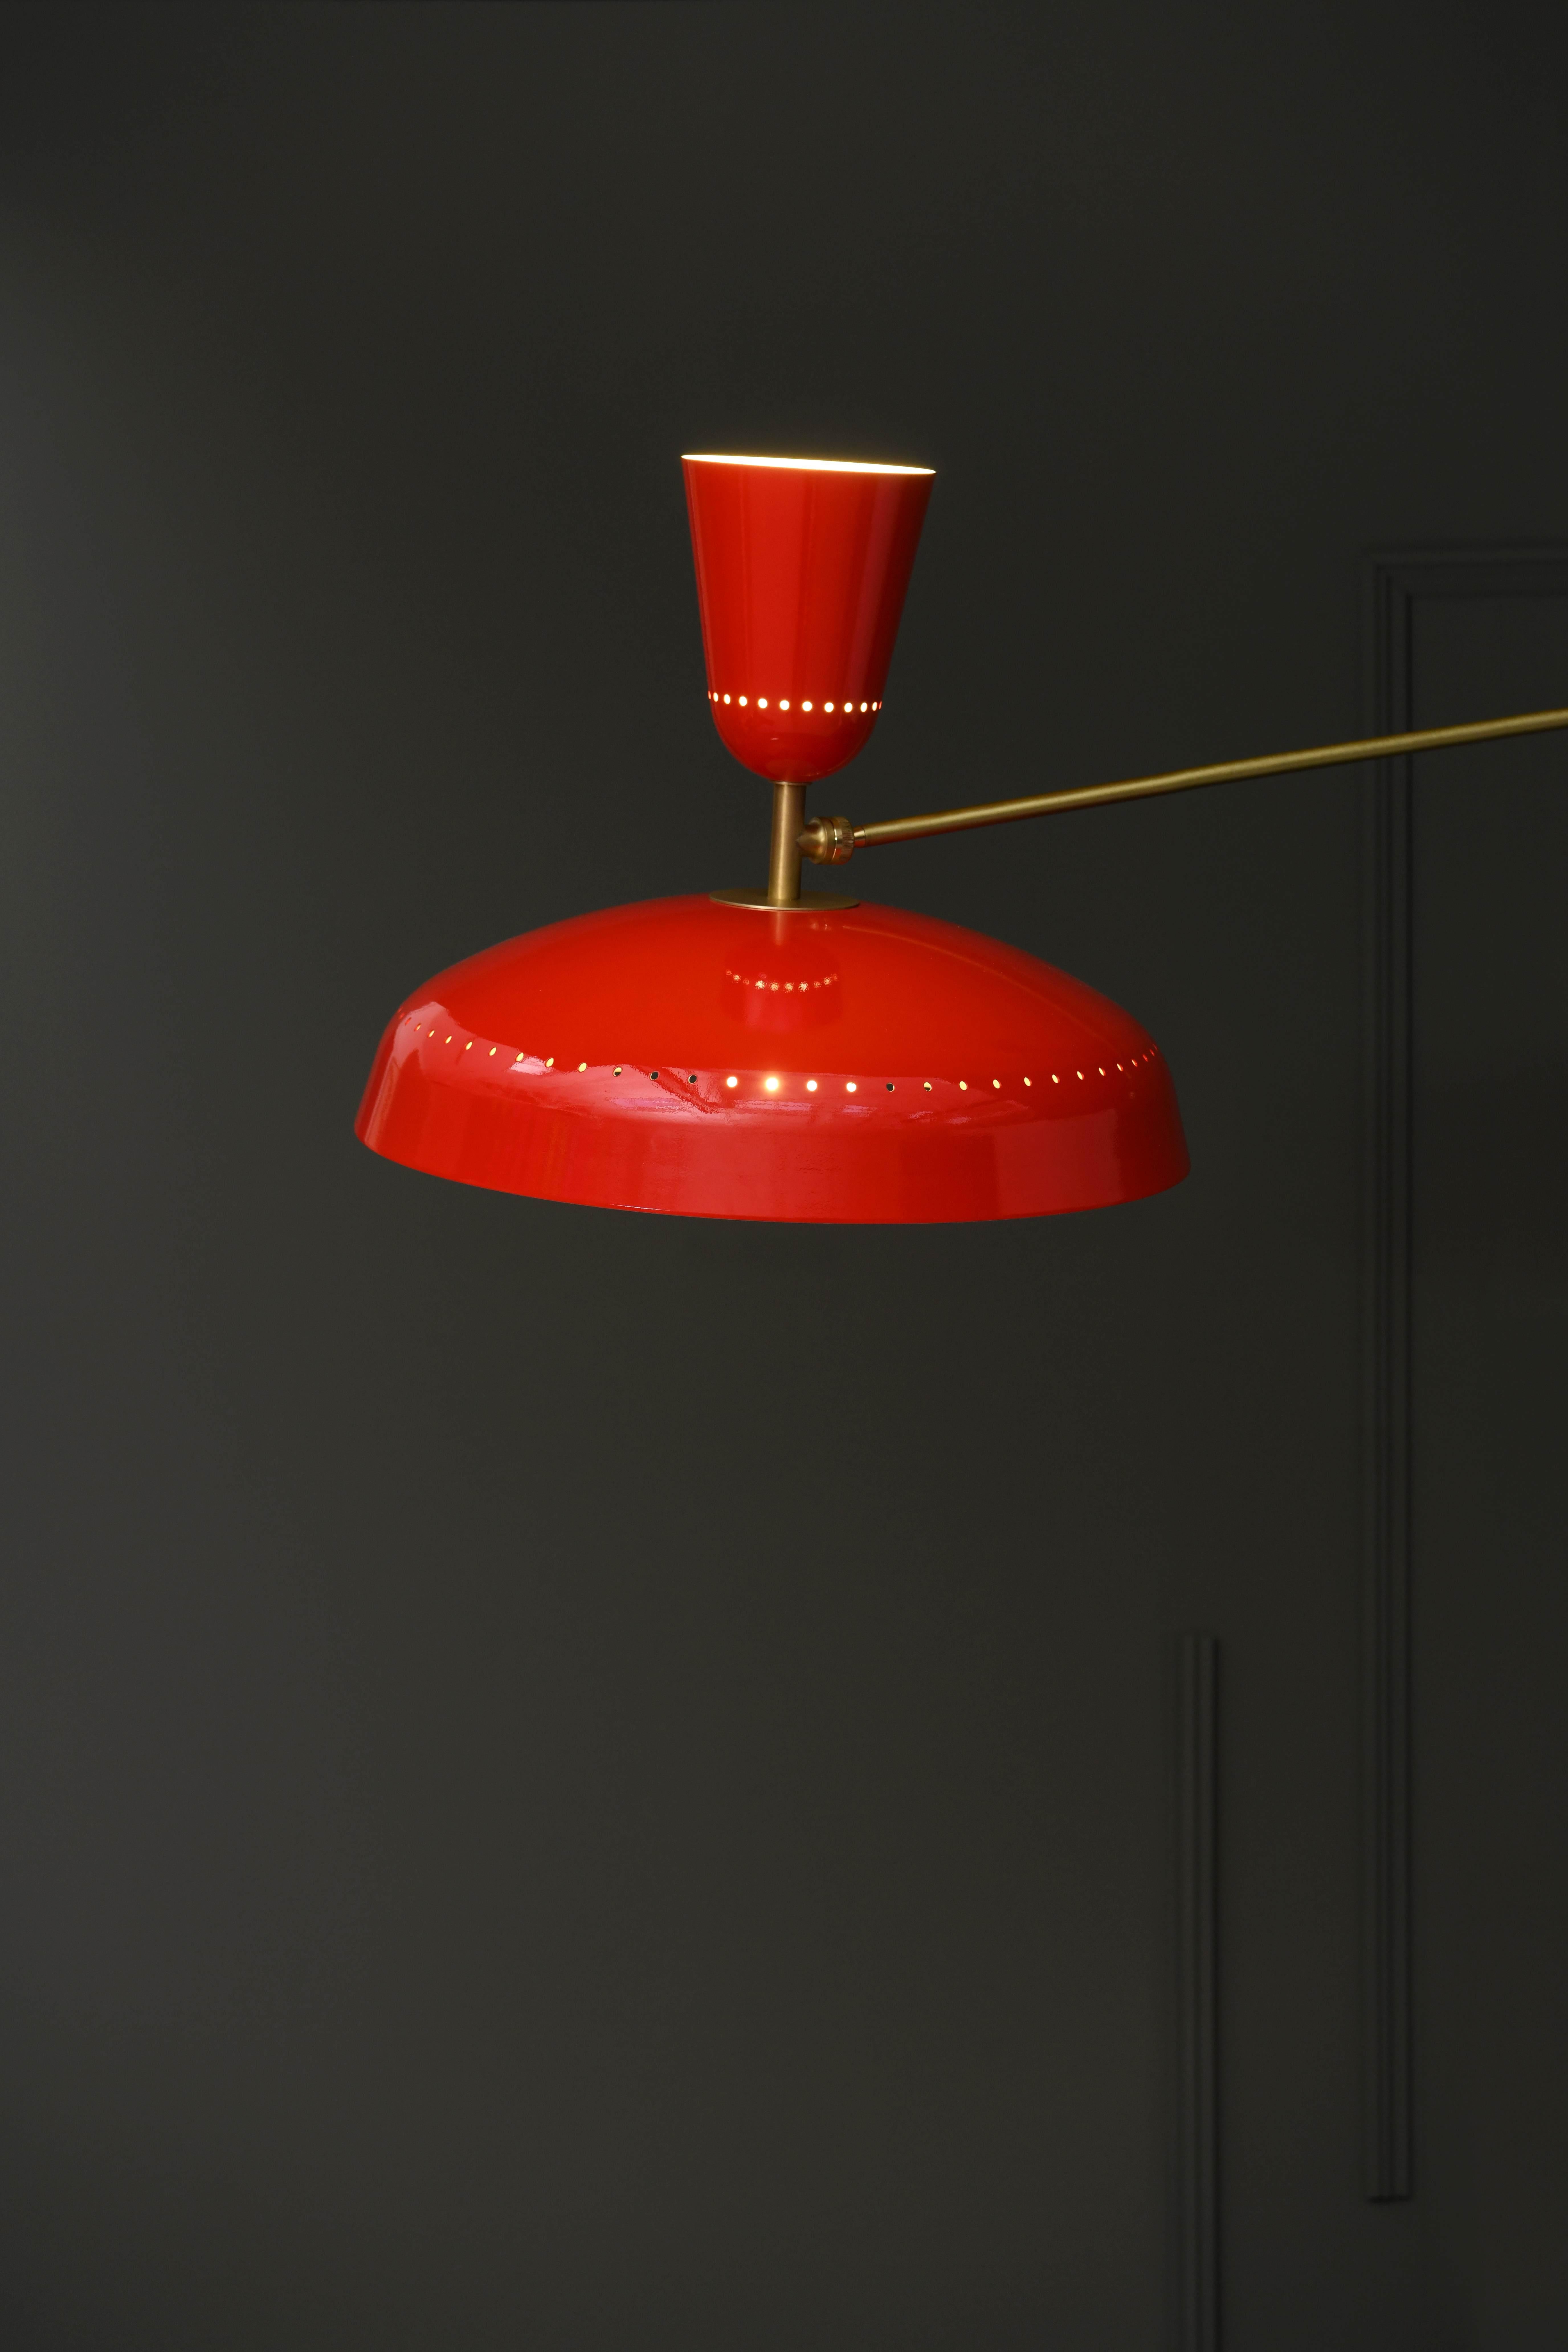 Large Pierre Guariche 'G1' floor lamp for Sammode studio in Red. 

Originally designed by Pierre Guariche in 1951, this iconic floor lamp is newly produced in an authorized re-edition by Sammode Studio in France embracing many of the same